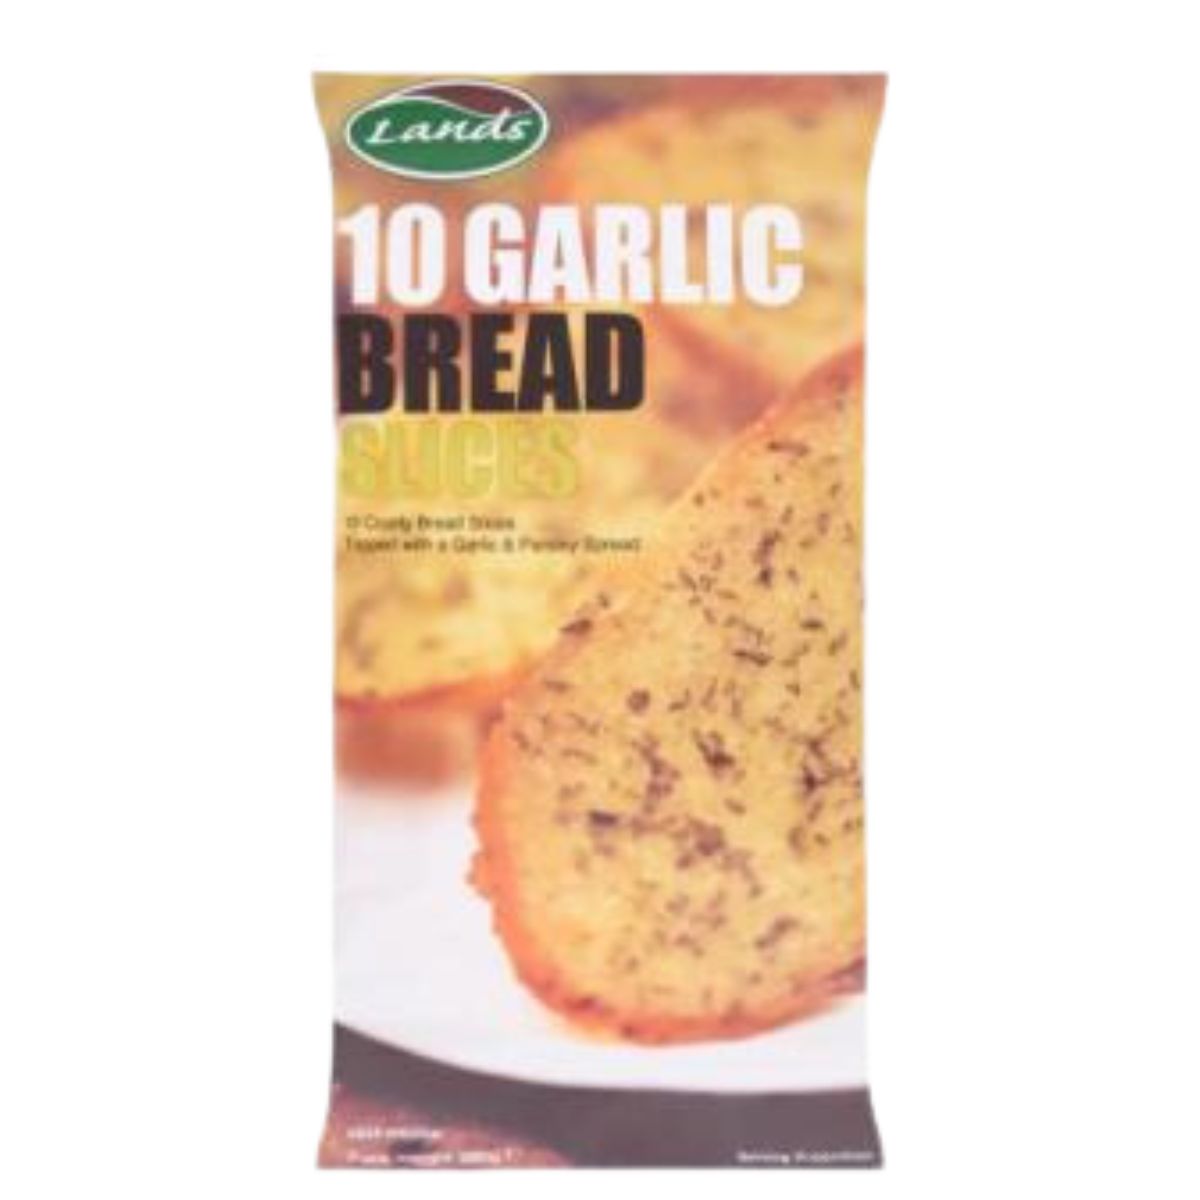 Packaging of "Lands - 10 Garlic Bread Slices - 280g" with an image of the product displayed.